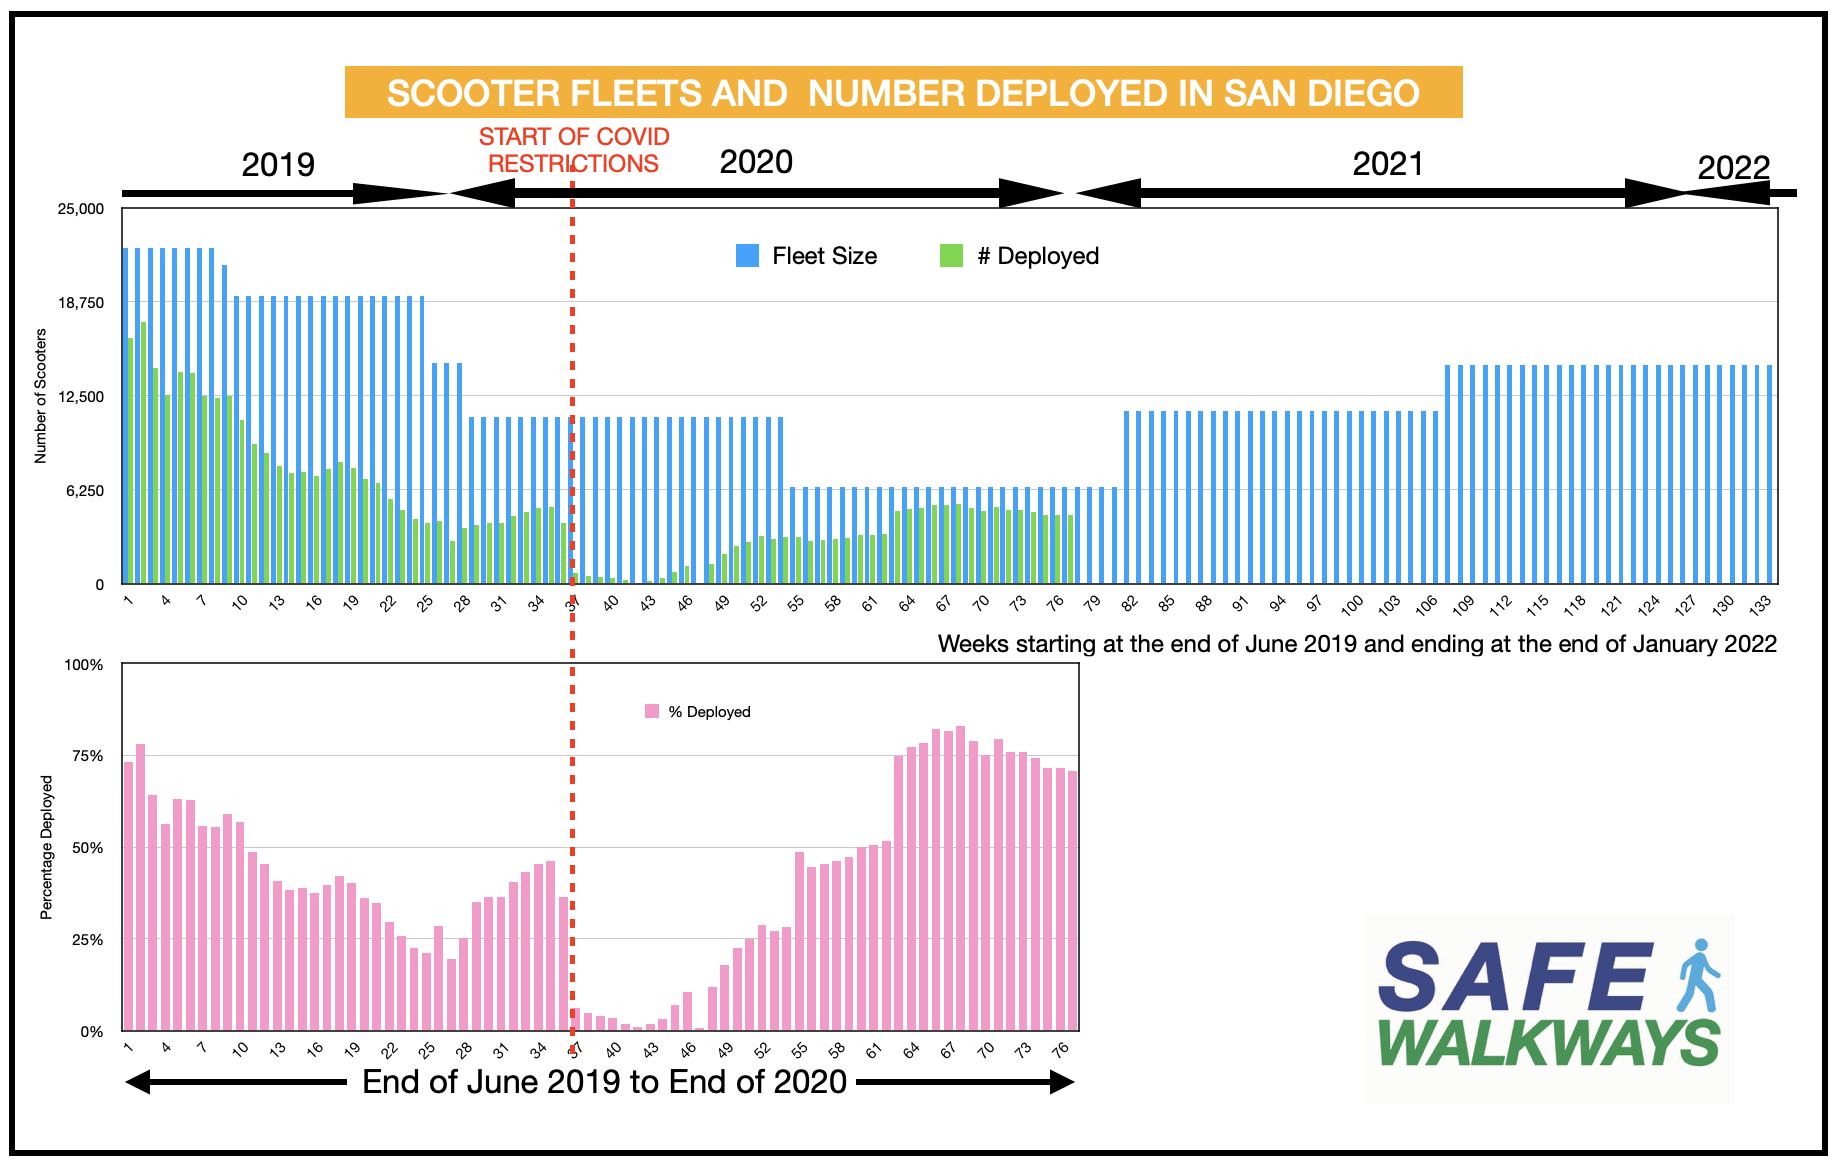 Fleet size, number of scooters deployed and percent of fleet deployed. (Source: Weekly Scooter Metrics)